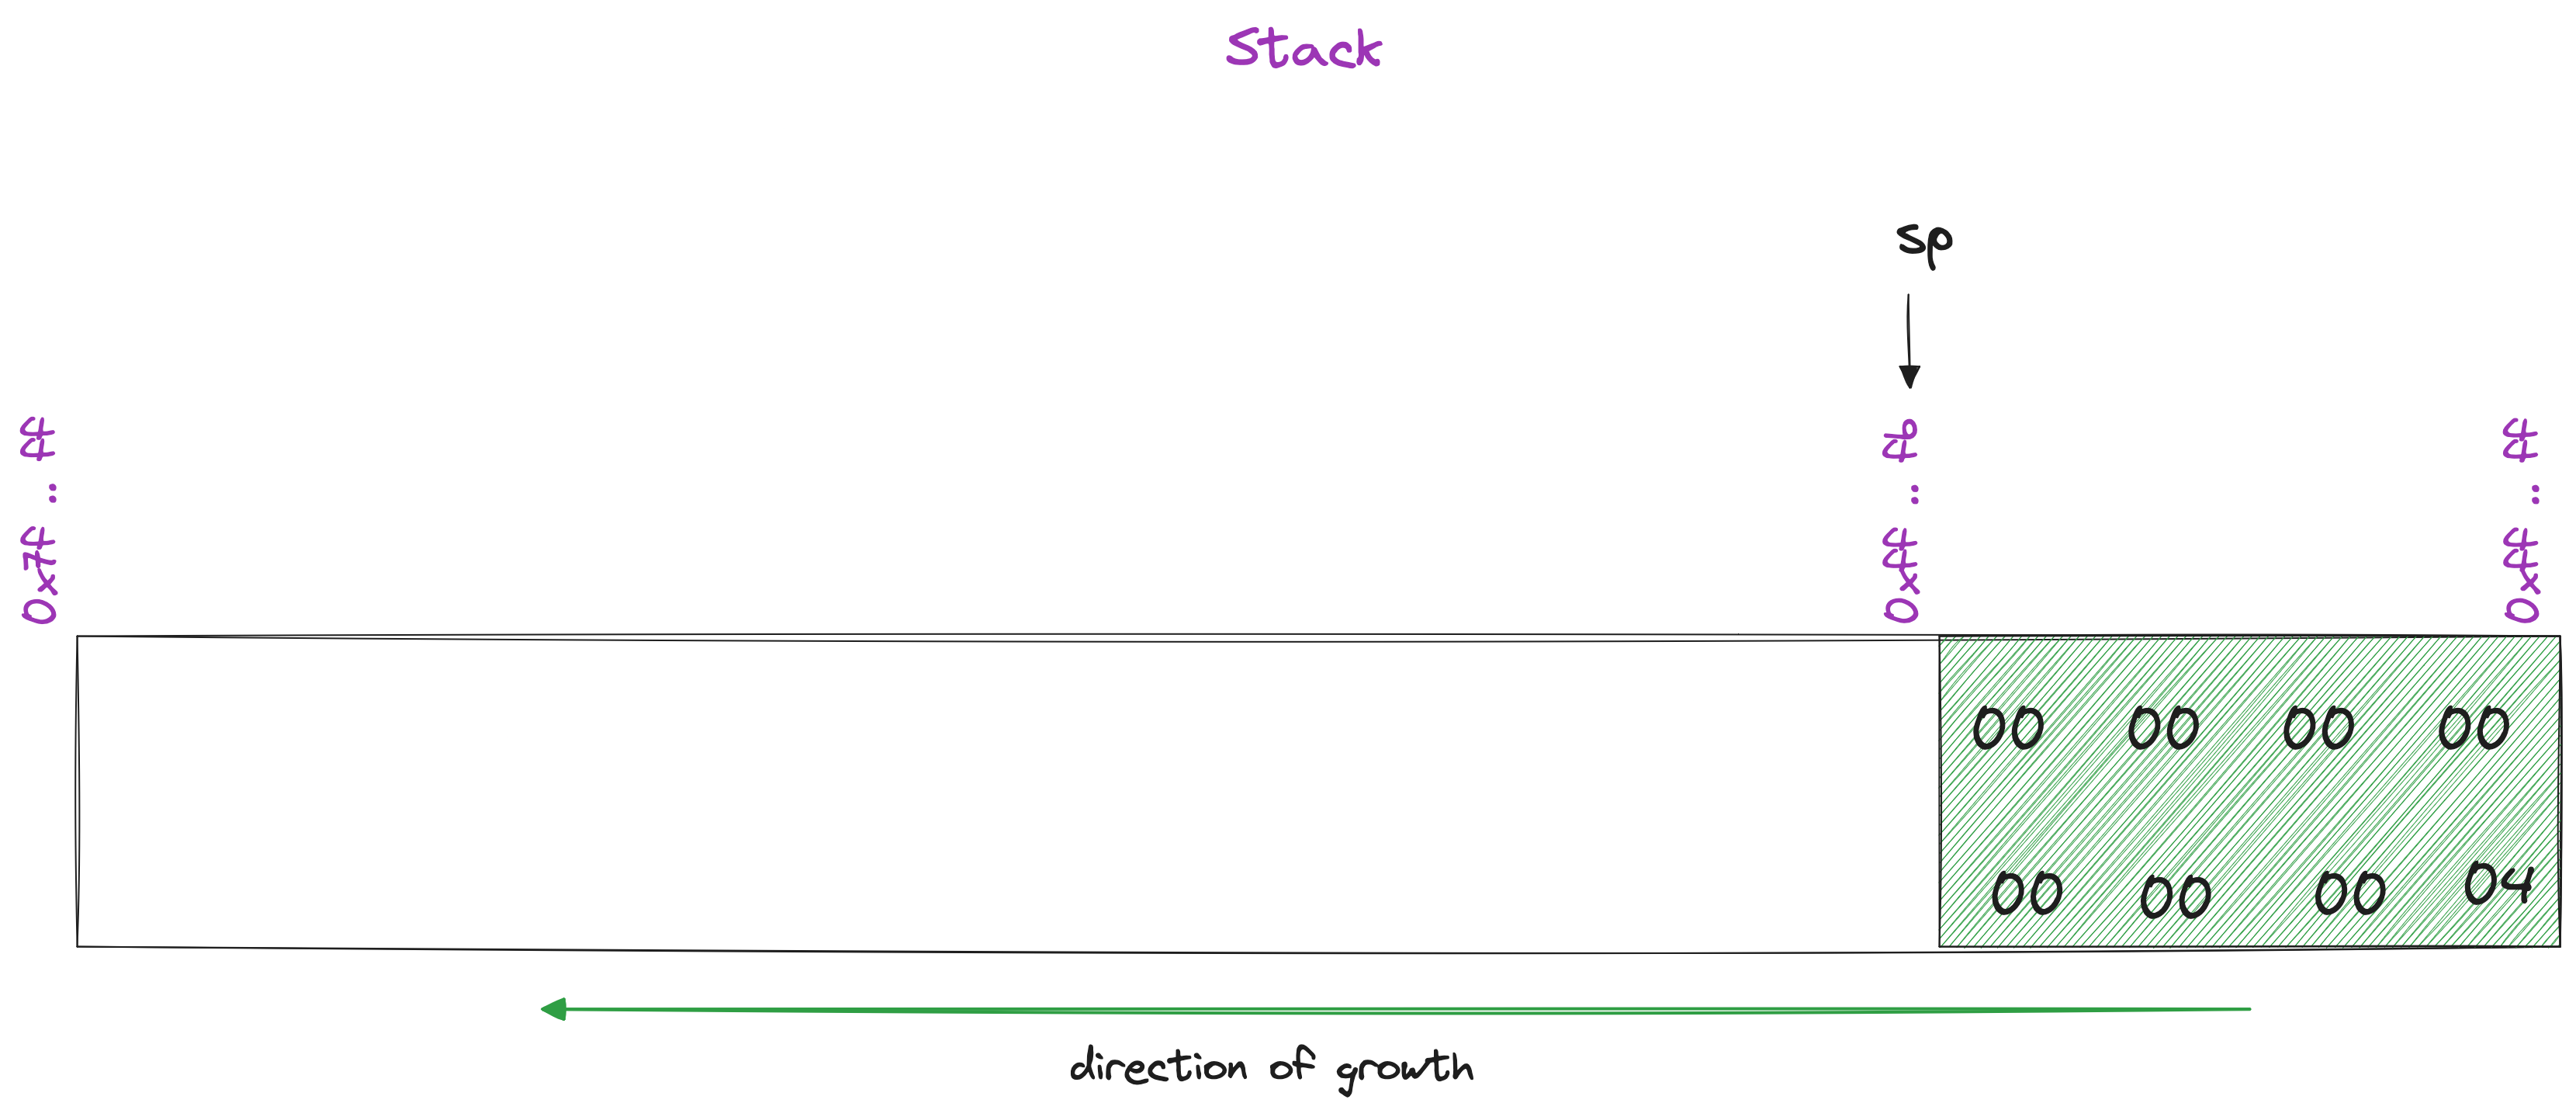 Linear stack simple vis